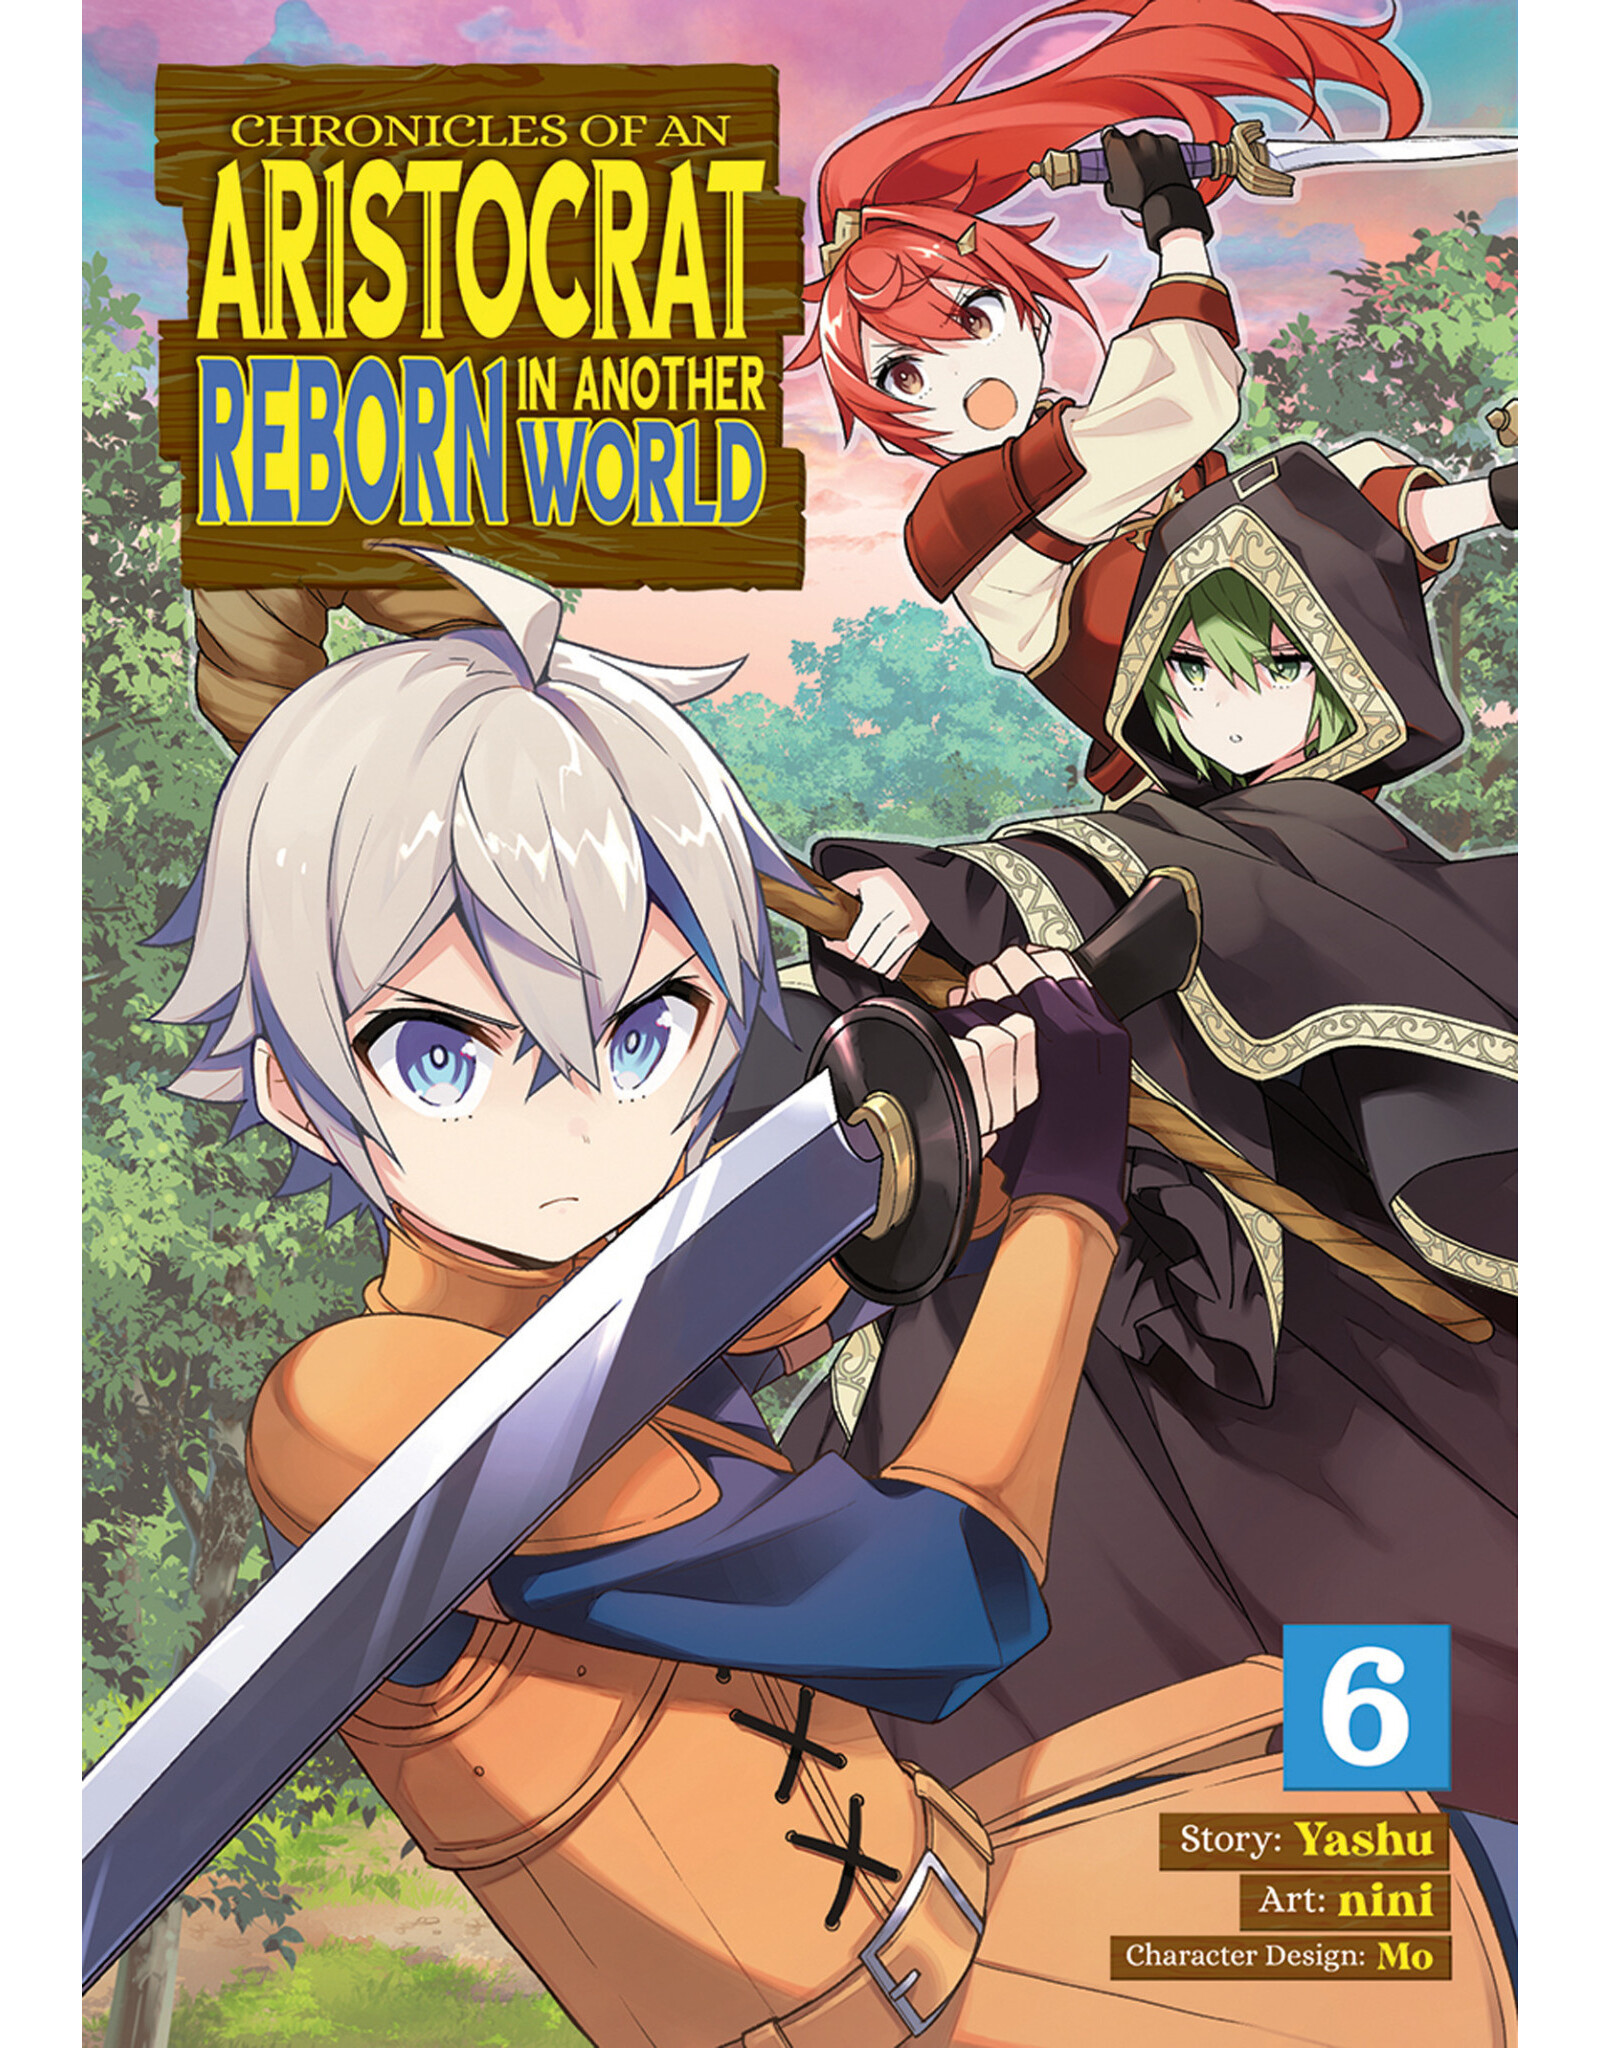 Chronicles of an Aristocrat Reborn in Another World 06 (English) - Manga